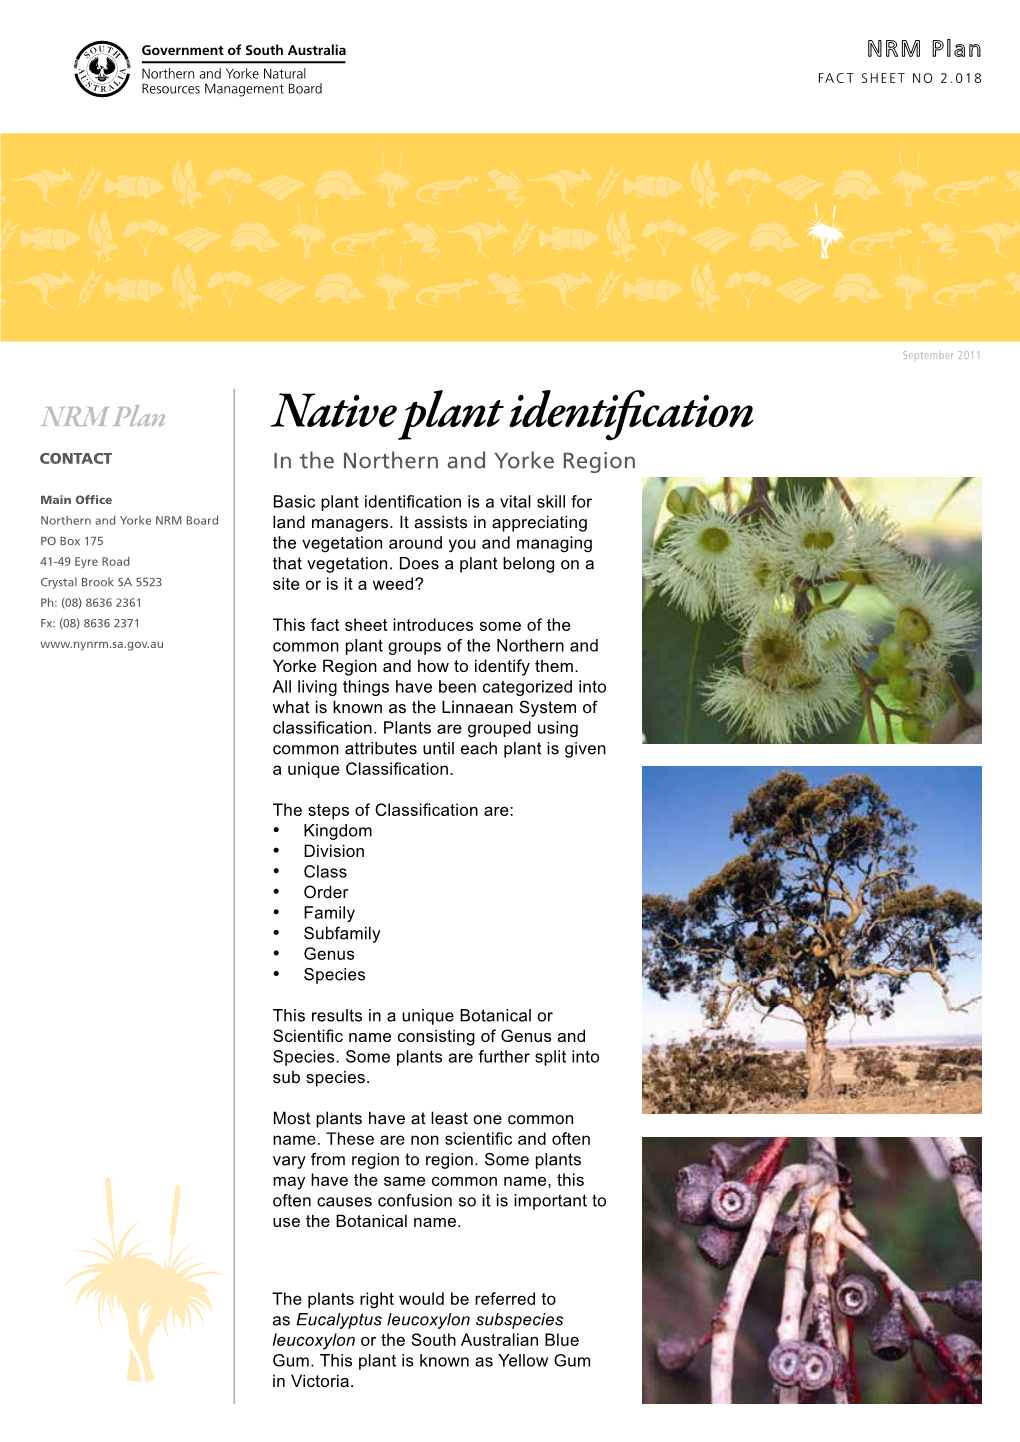 Native Plant Identification CONTACT in the Northern and Yorke Region